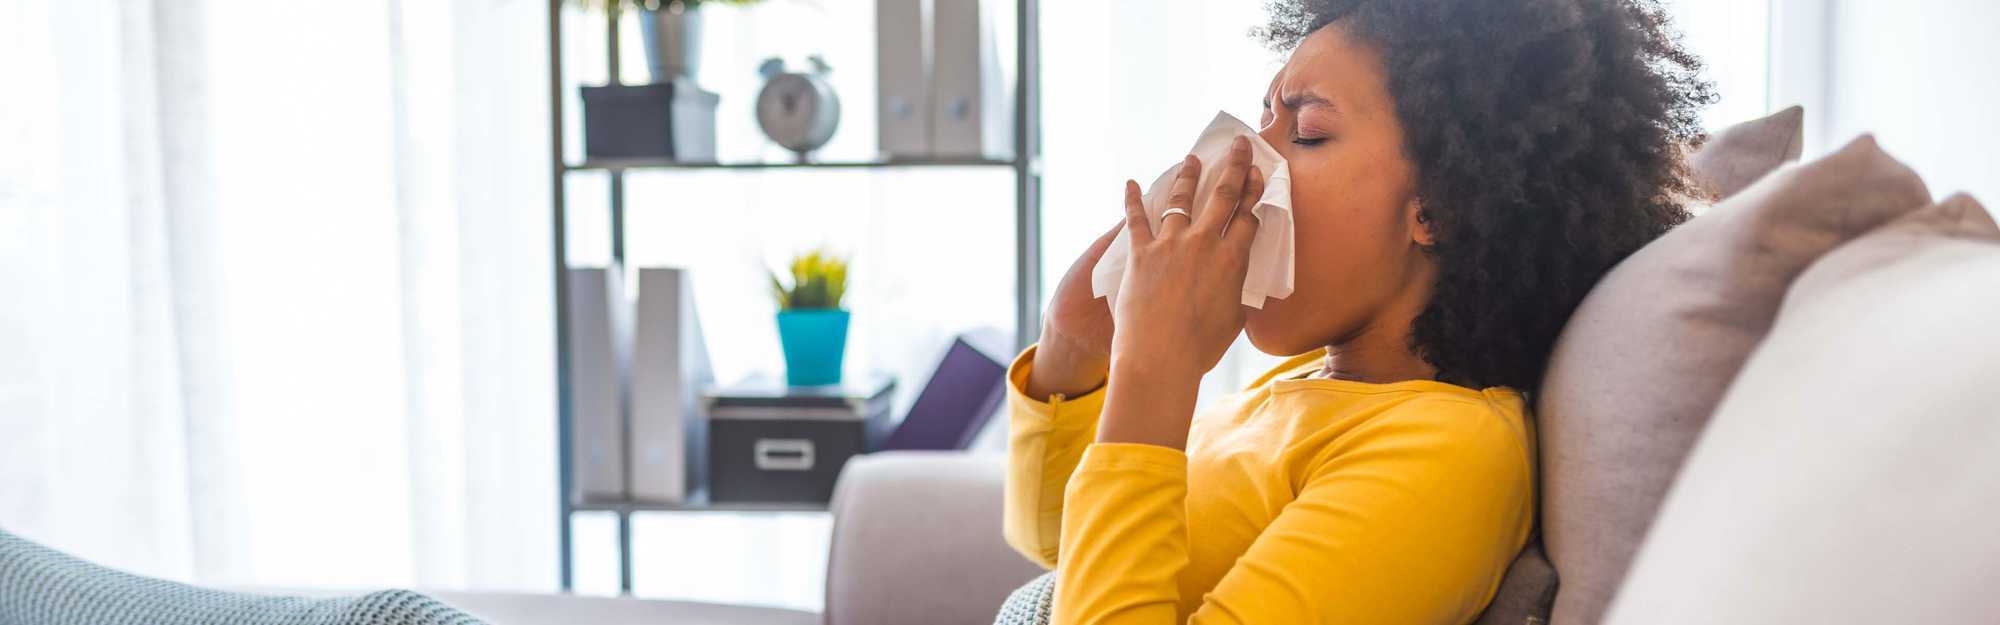 The Myths about Colds and Flu